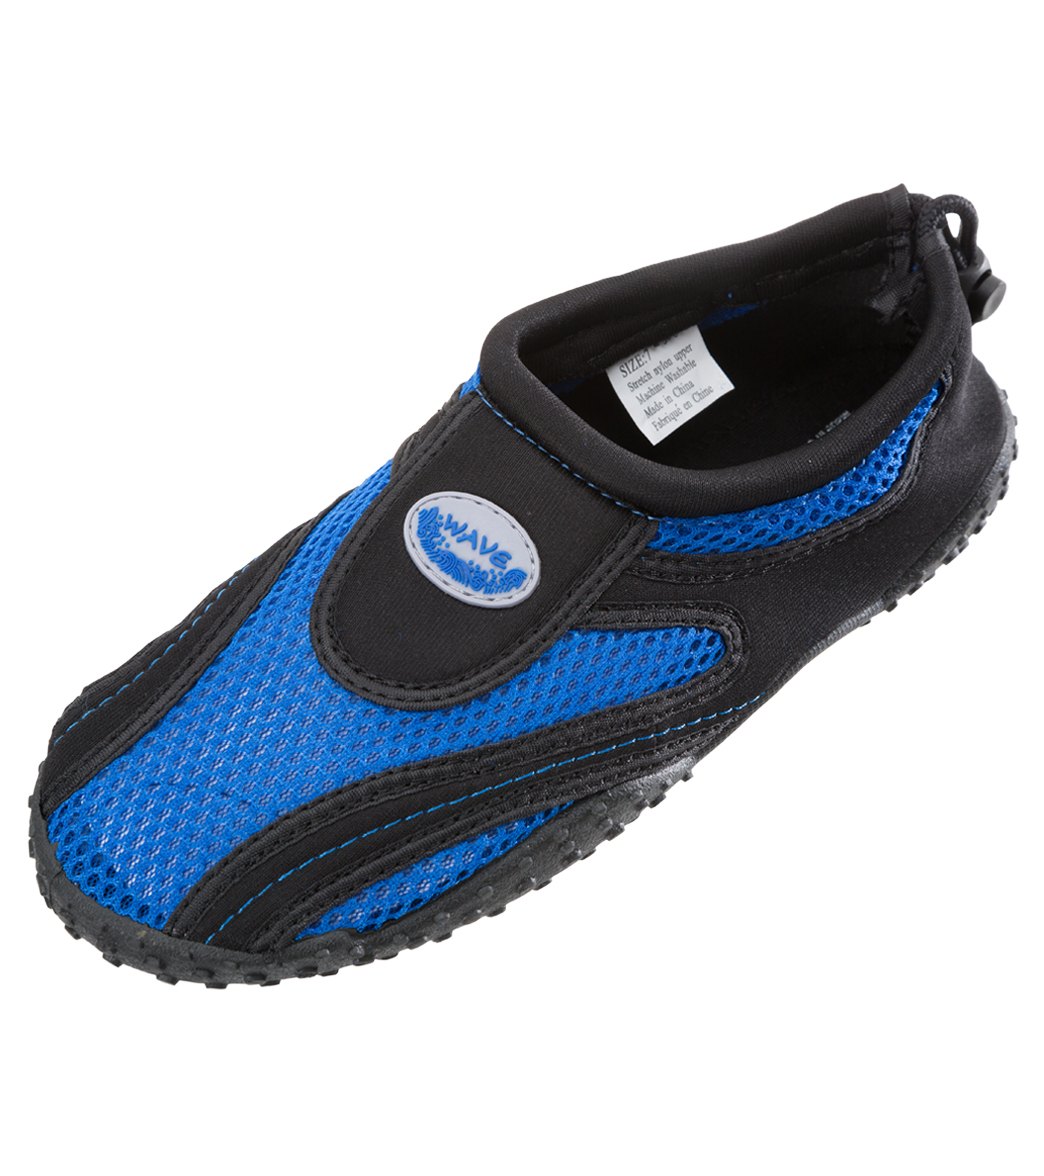 Easy Usa Women's Wave Water Shoes - Black/Royal 6 - Swimoutlet.com